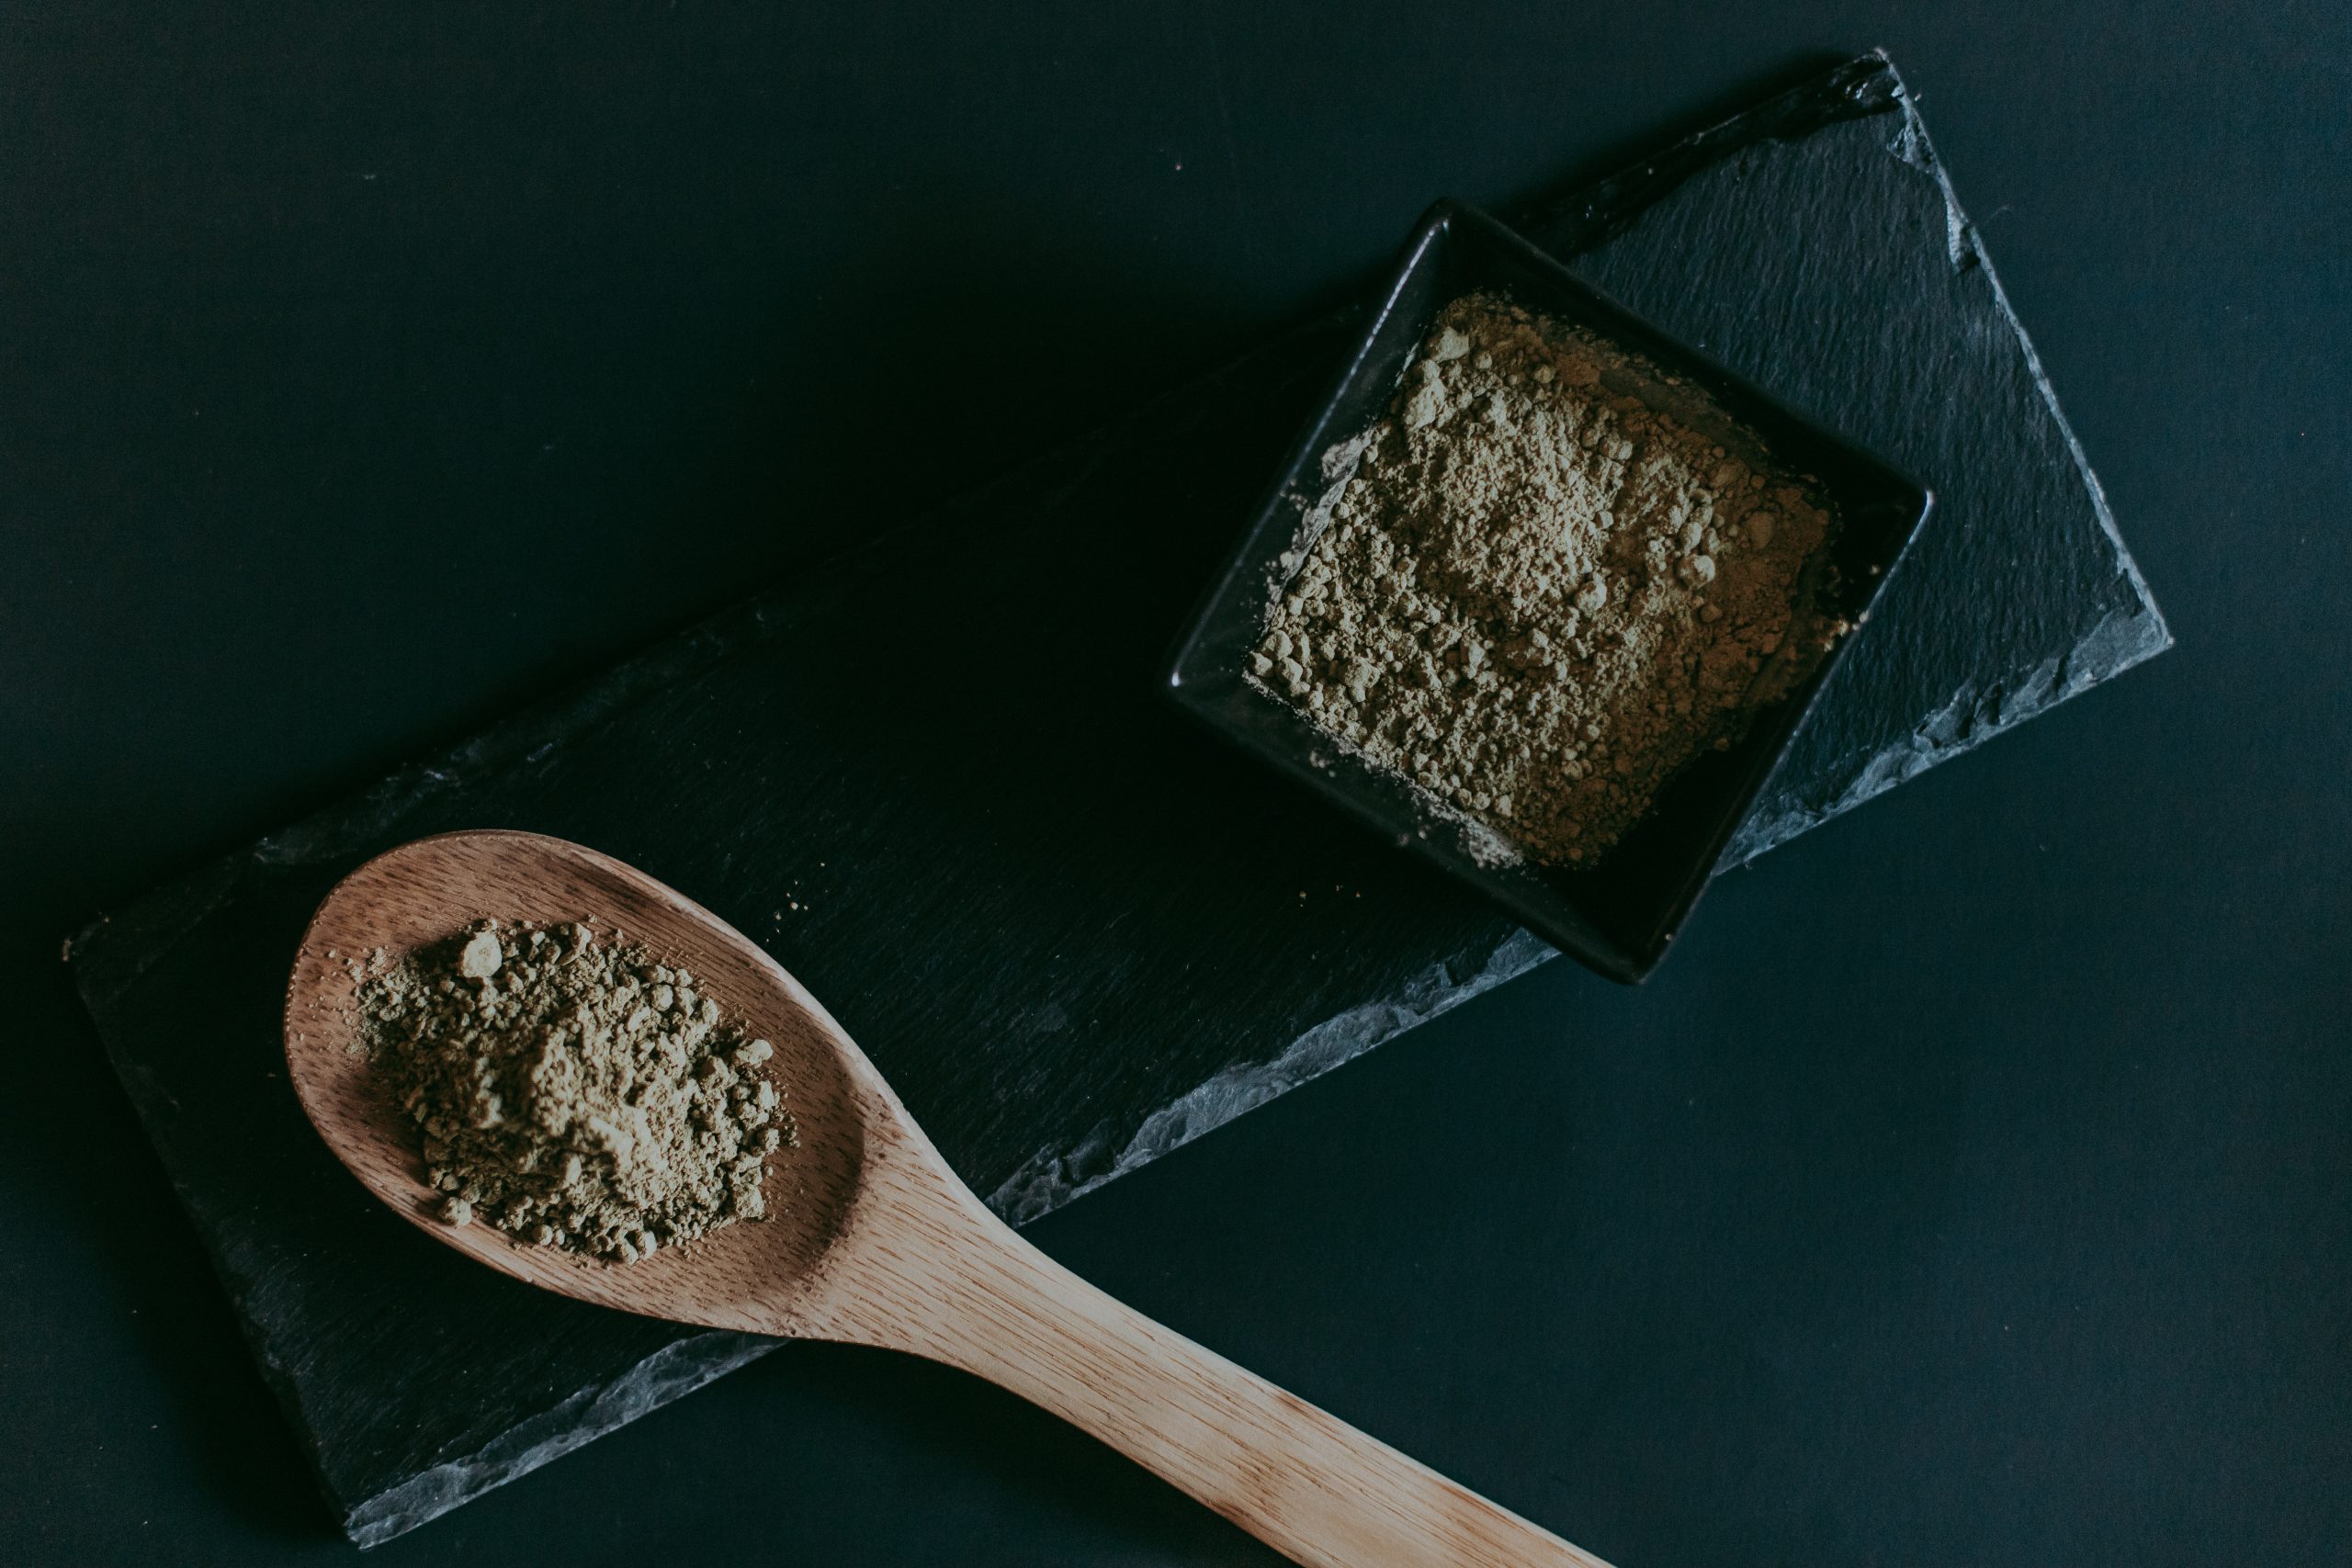 Maeng da Kratom: what are its types?